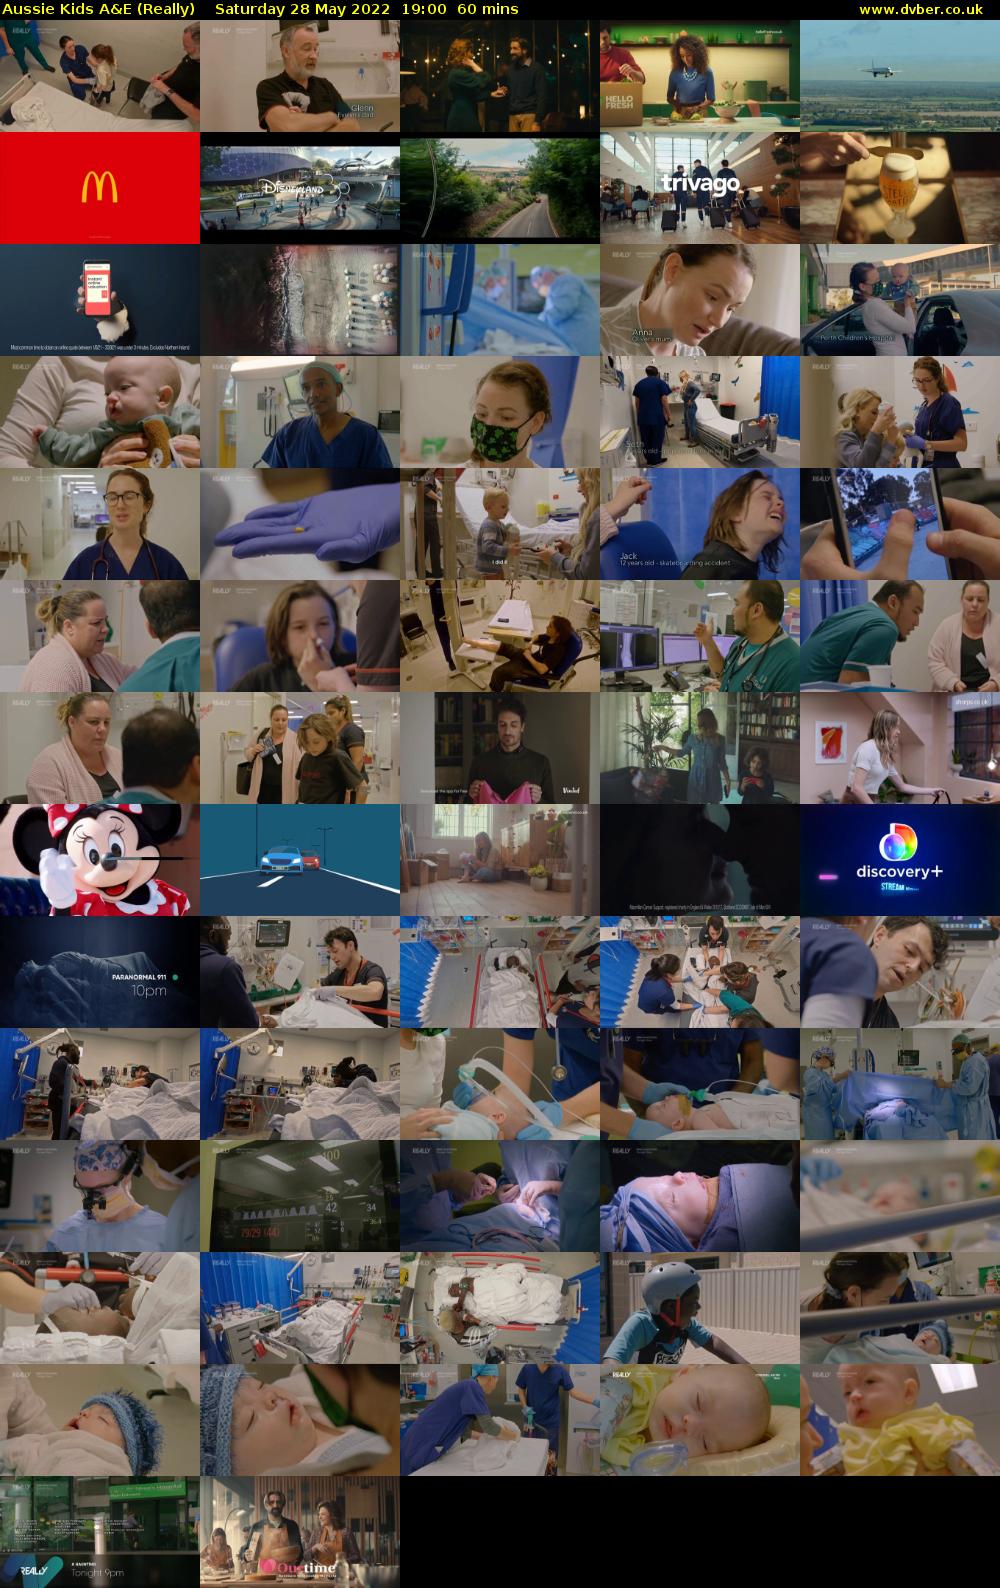 Aussie Kids A&E (Really) Saturday 28 May 2022 19:00 - 20:00